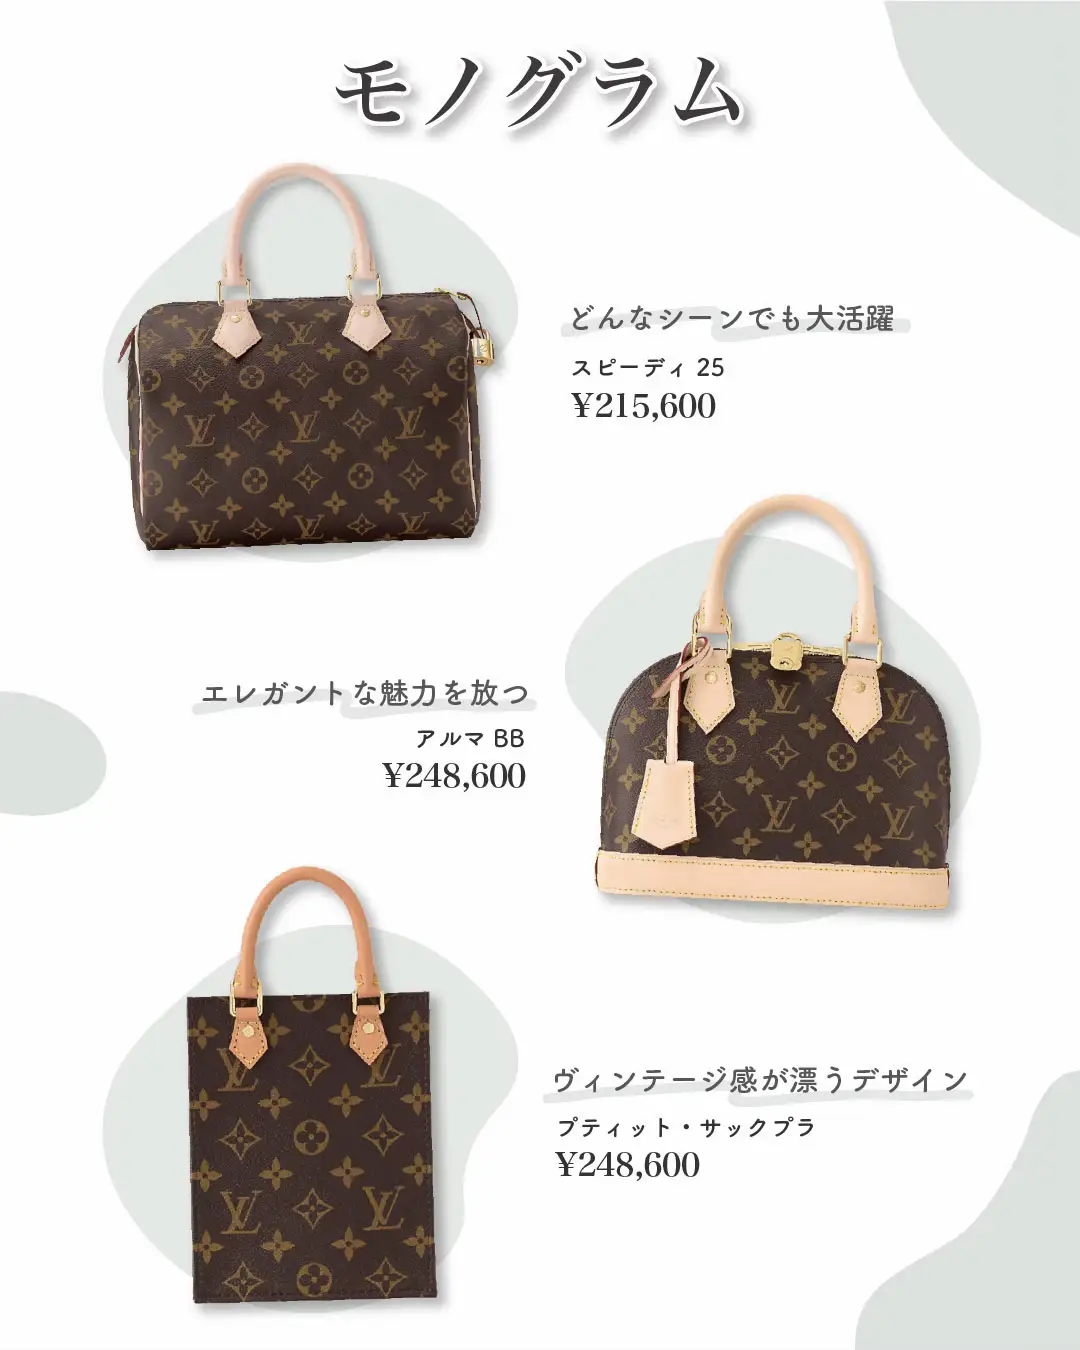 Let me introduce you to my new best friend. #louisvuitton